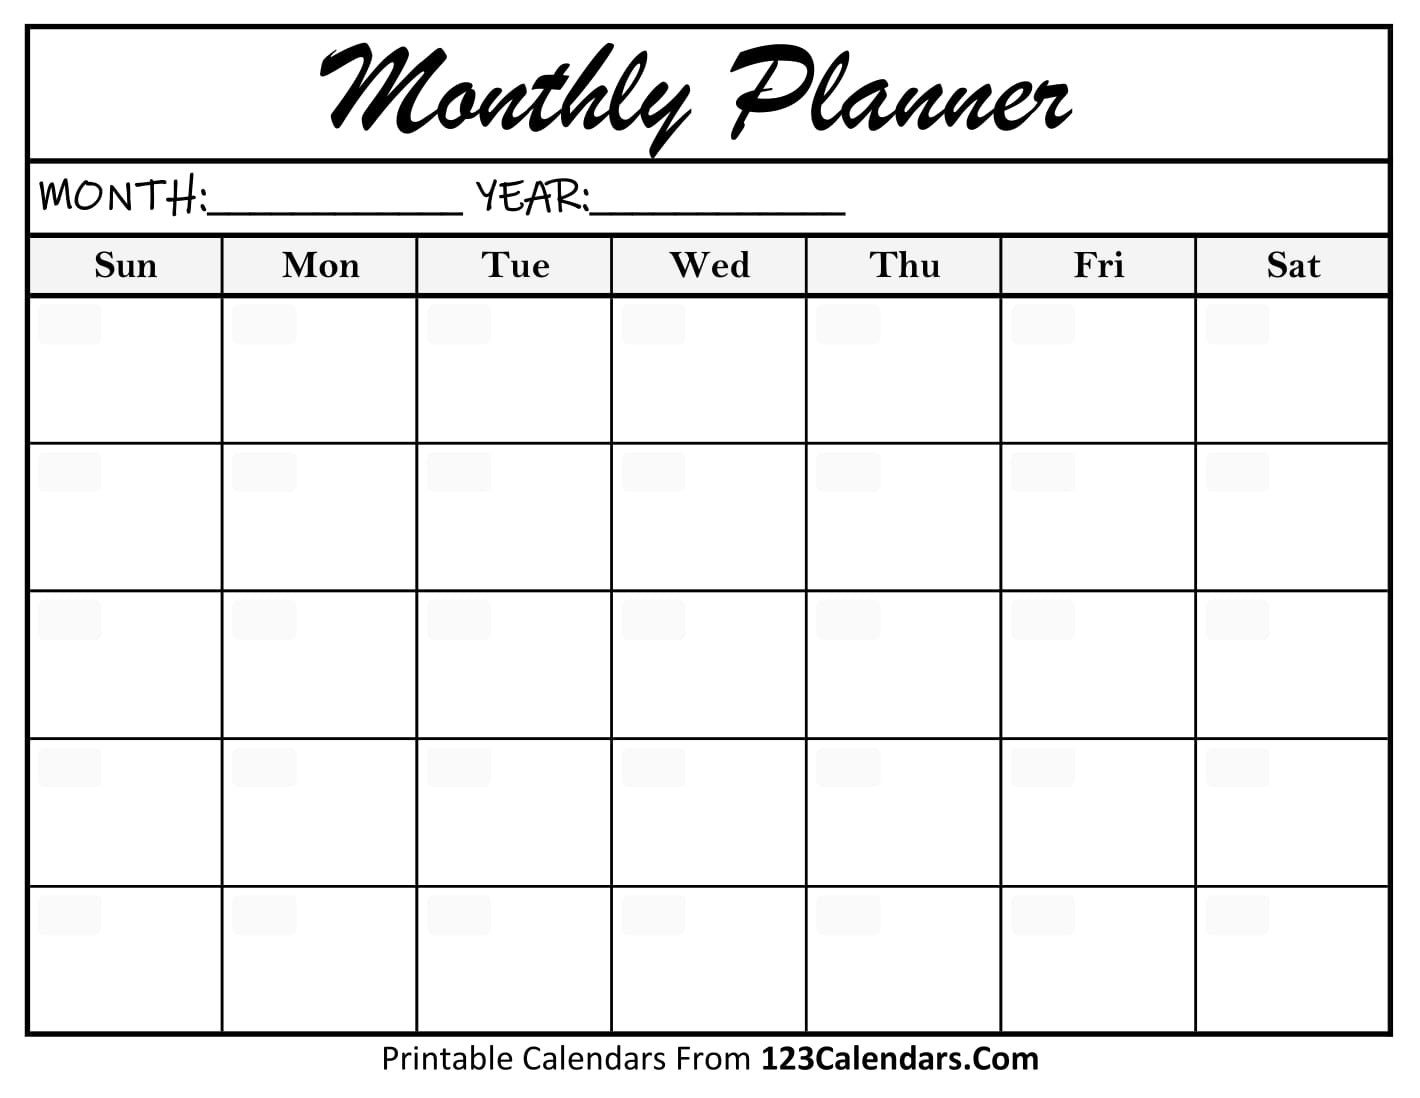 free-day-planner-page-in-two-styles-free-planner-printables-print